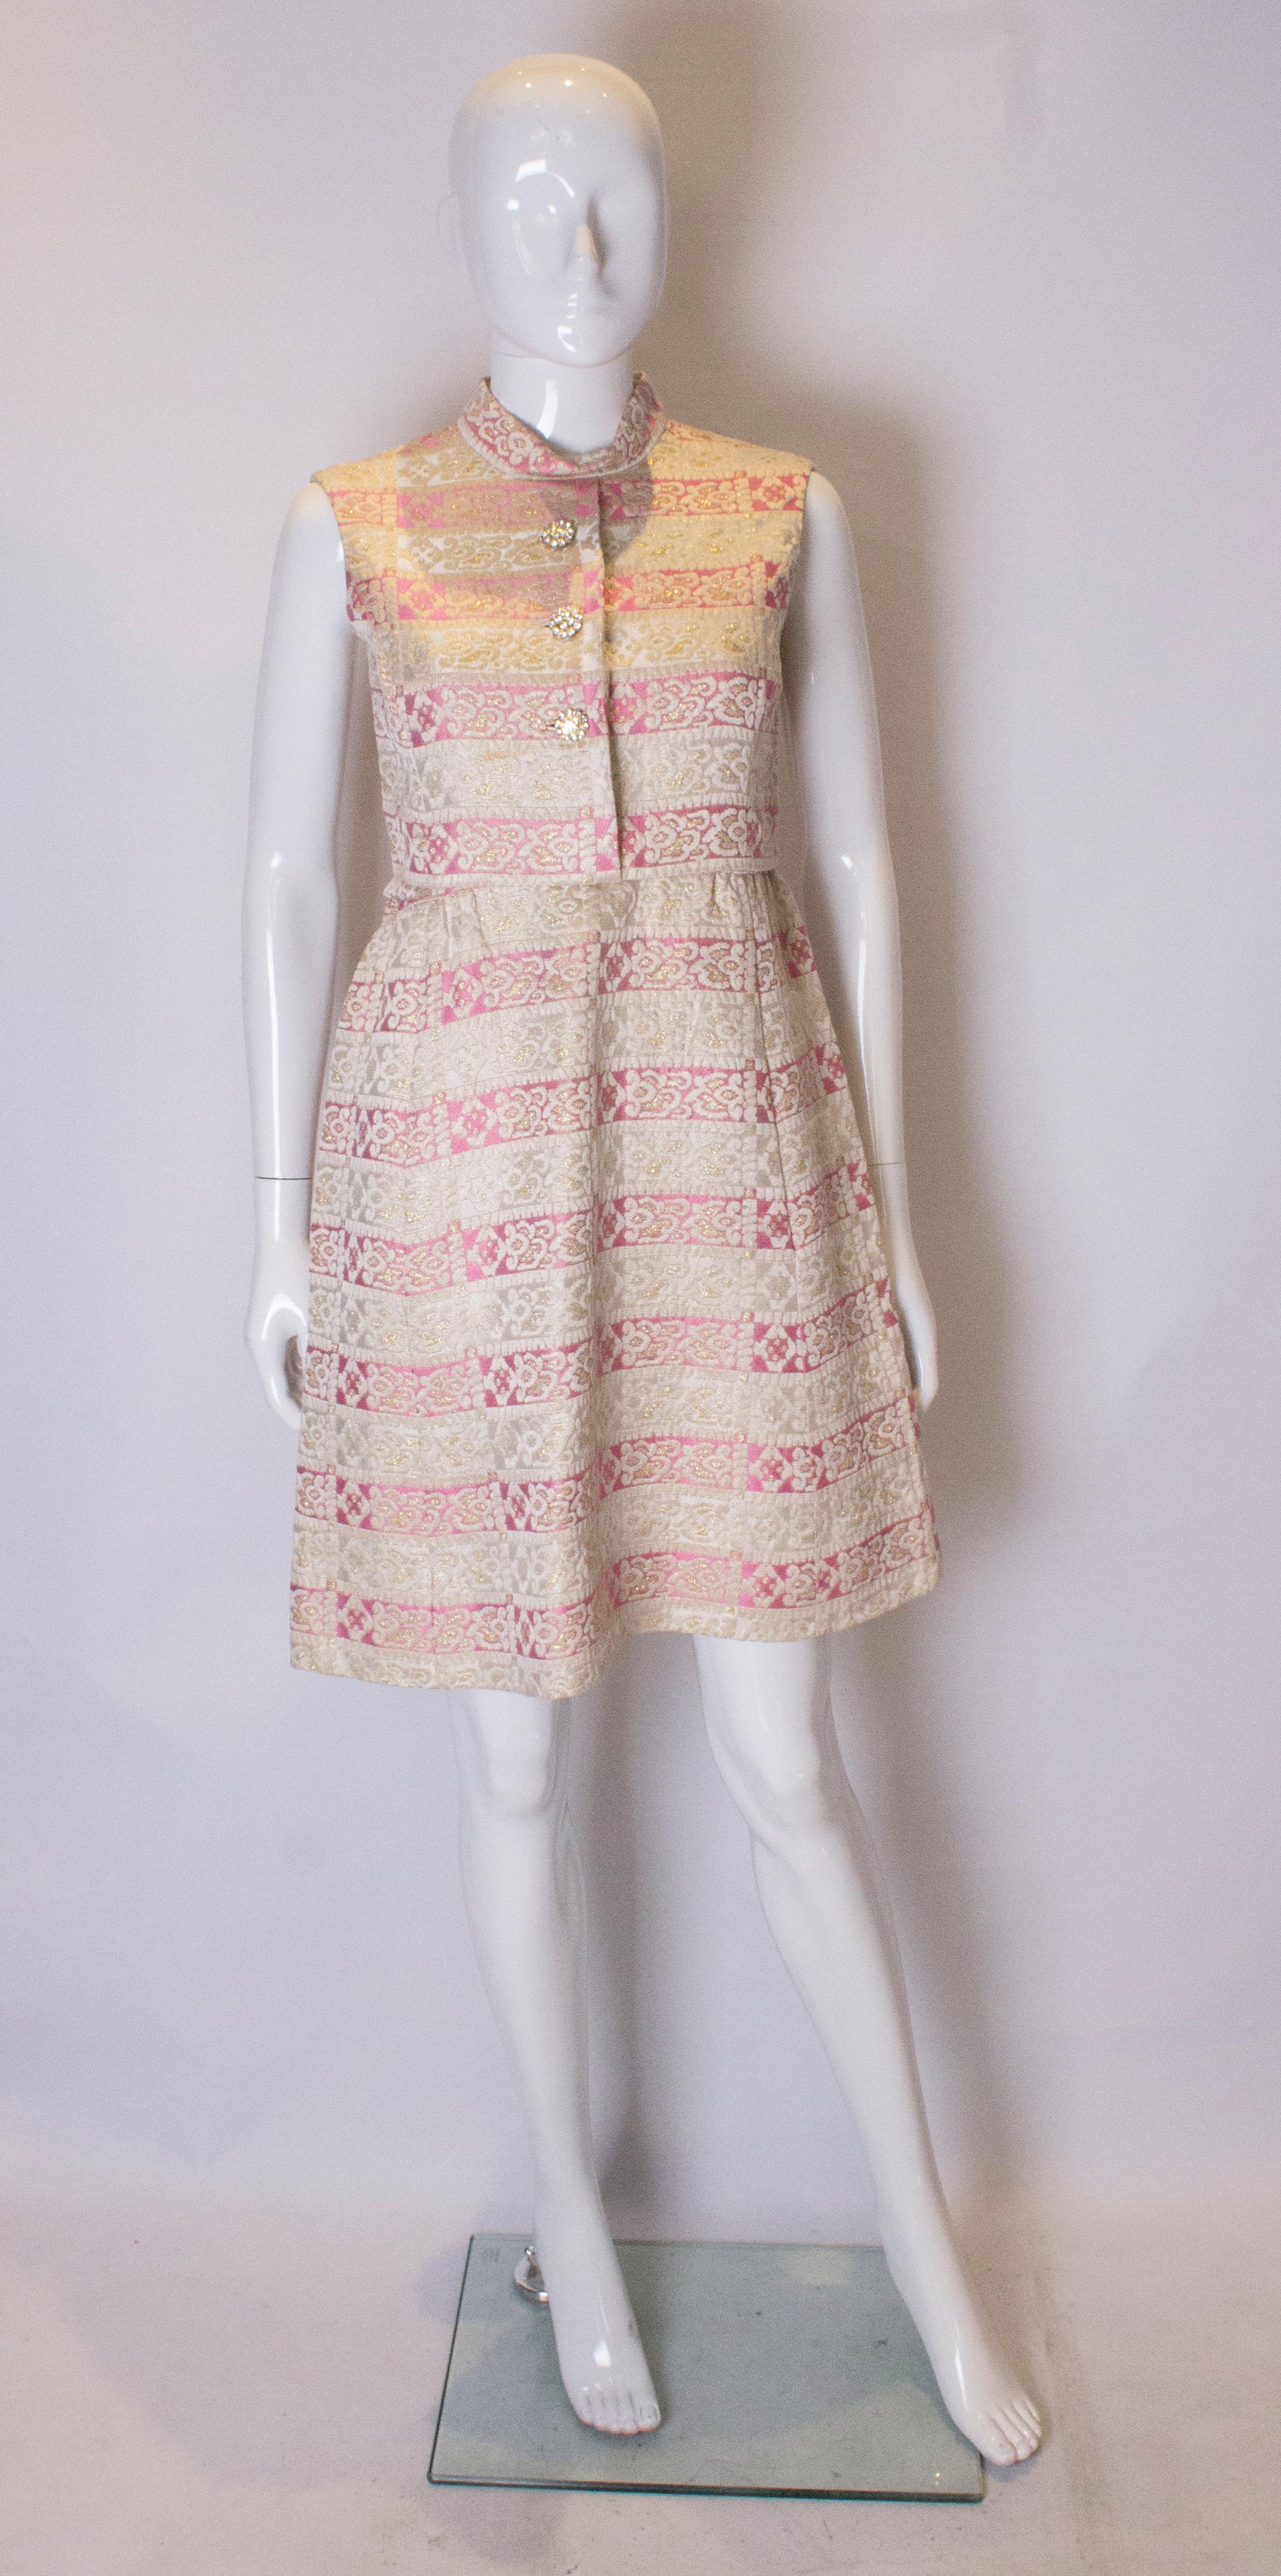 A chic cocktail dress from the 1960s.  The dress is in a pink and gold fabric, and is fully lined with a central back zip. It has a round neck, and decorative buttons at the front.  There are two pockets in the skirt part.